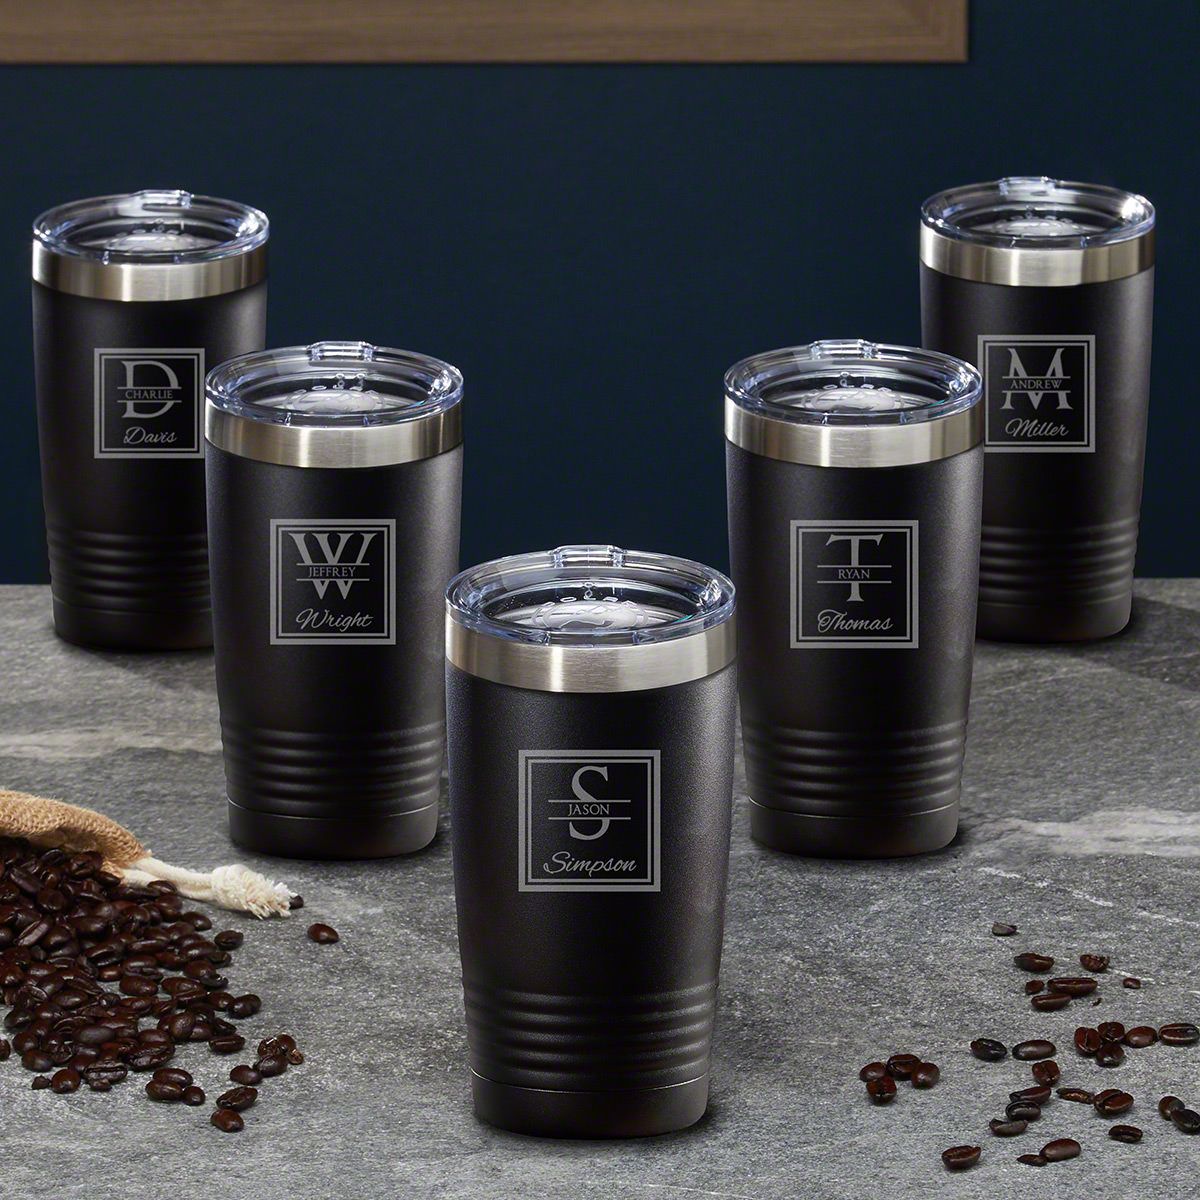 Best Man Gift 11 Pack Custom Engraved Stainless Tumblers- 20 oz Groomsman Gift Personalized Stainless Tumbler